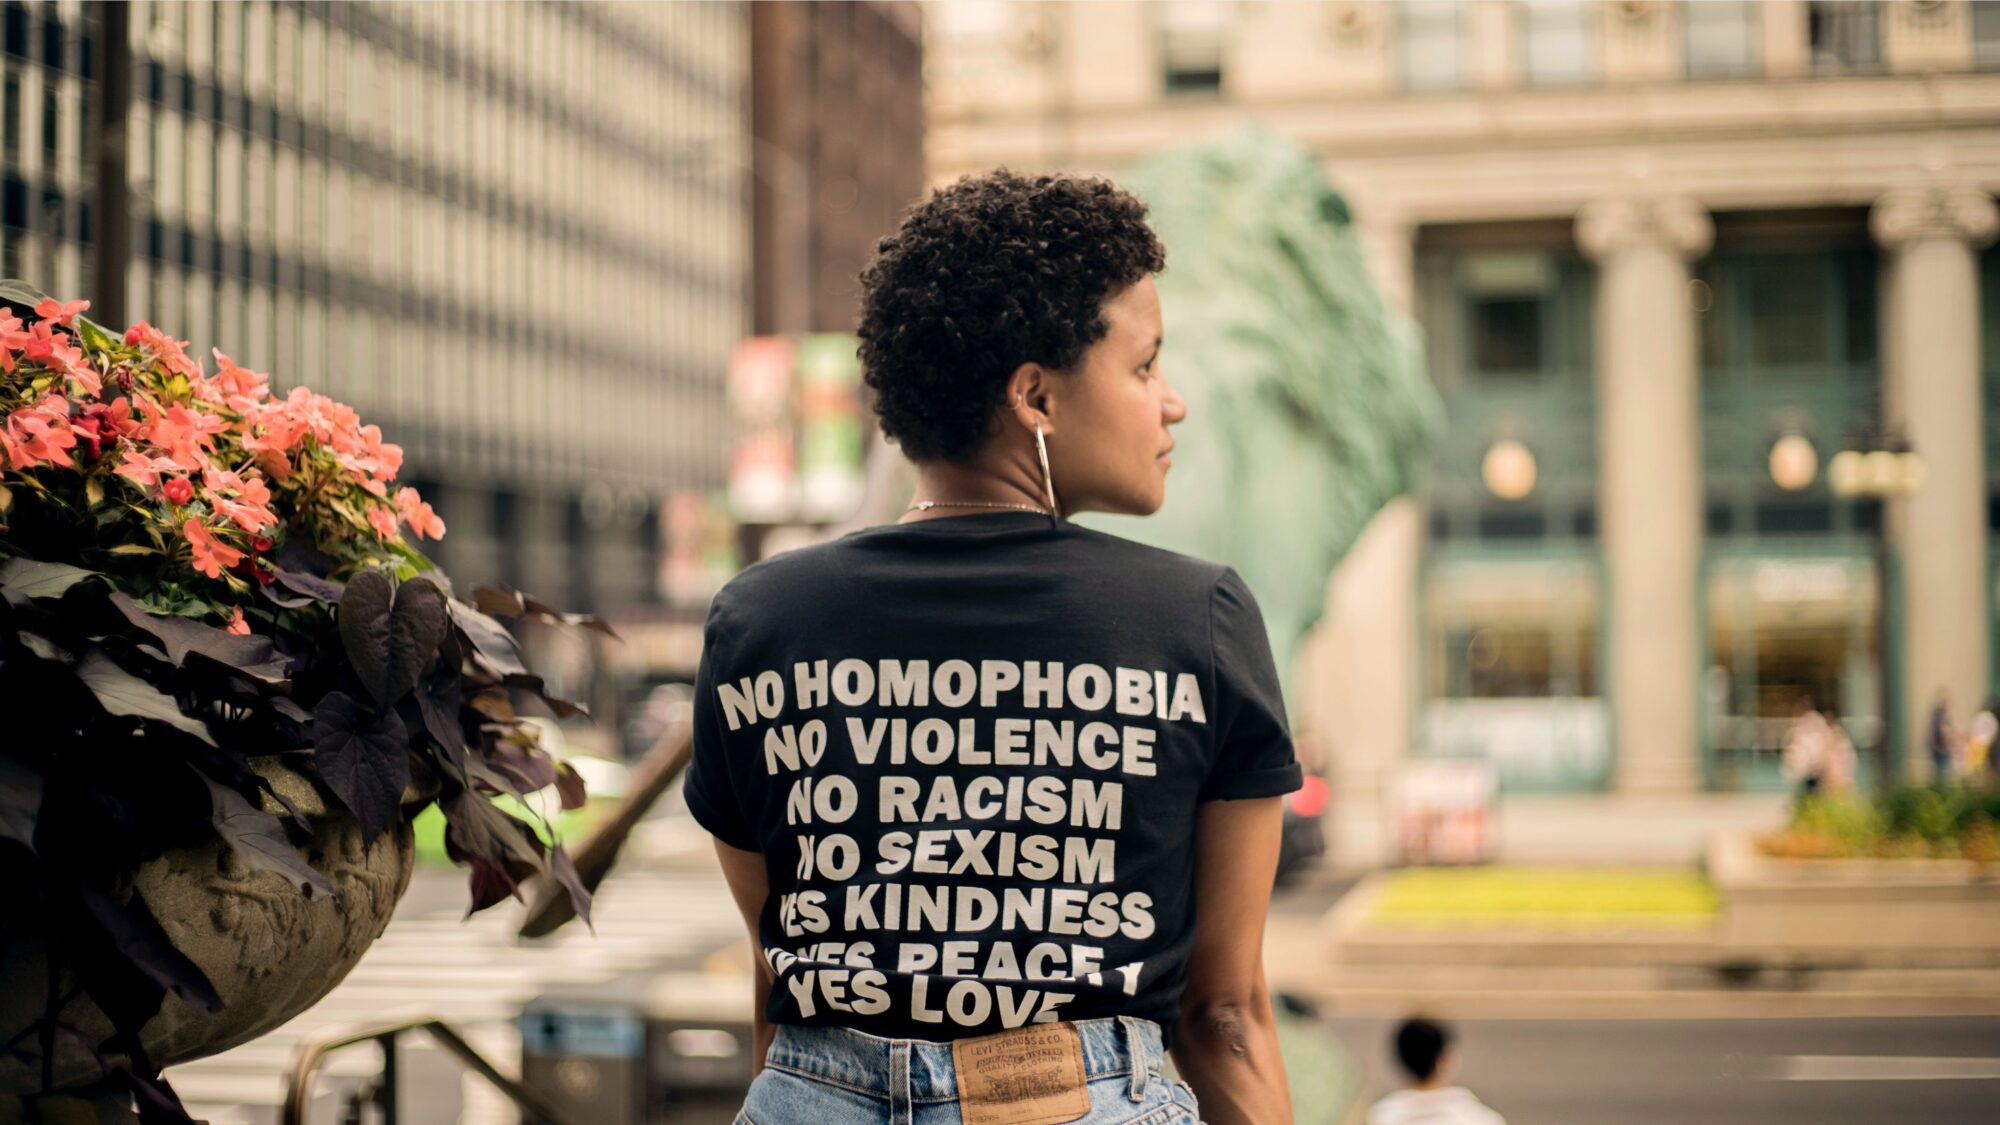 Woman wearing shirt advocating for equality